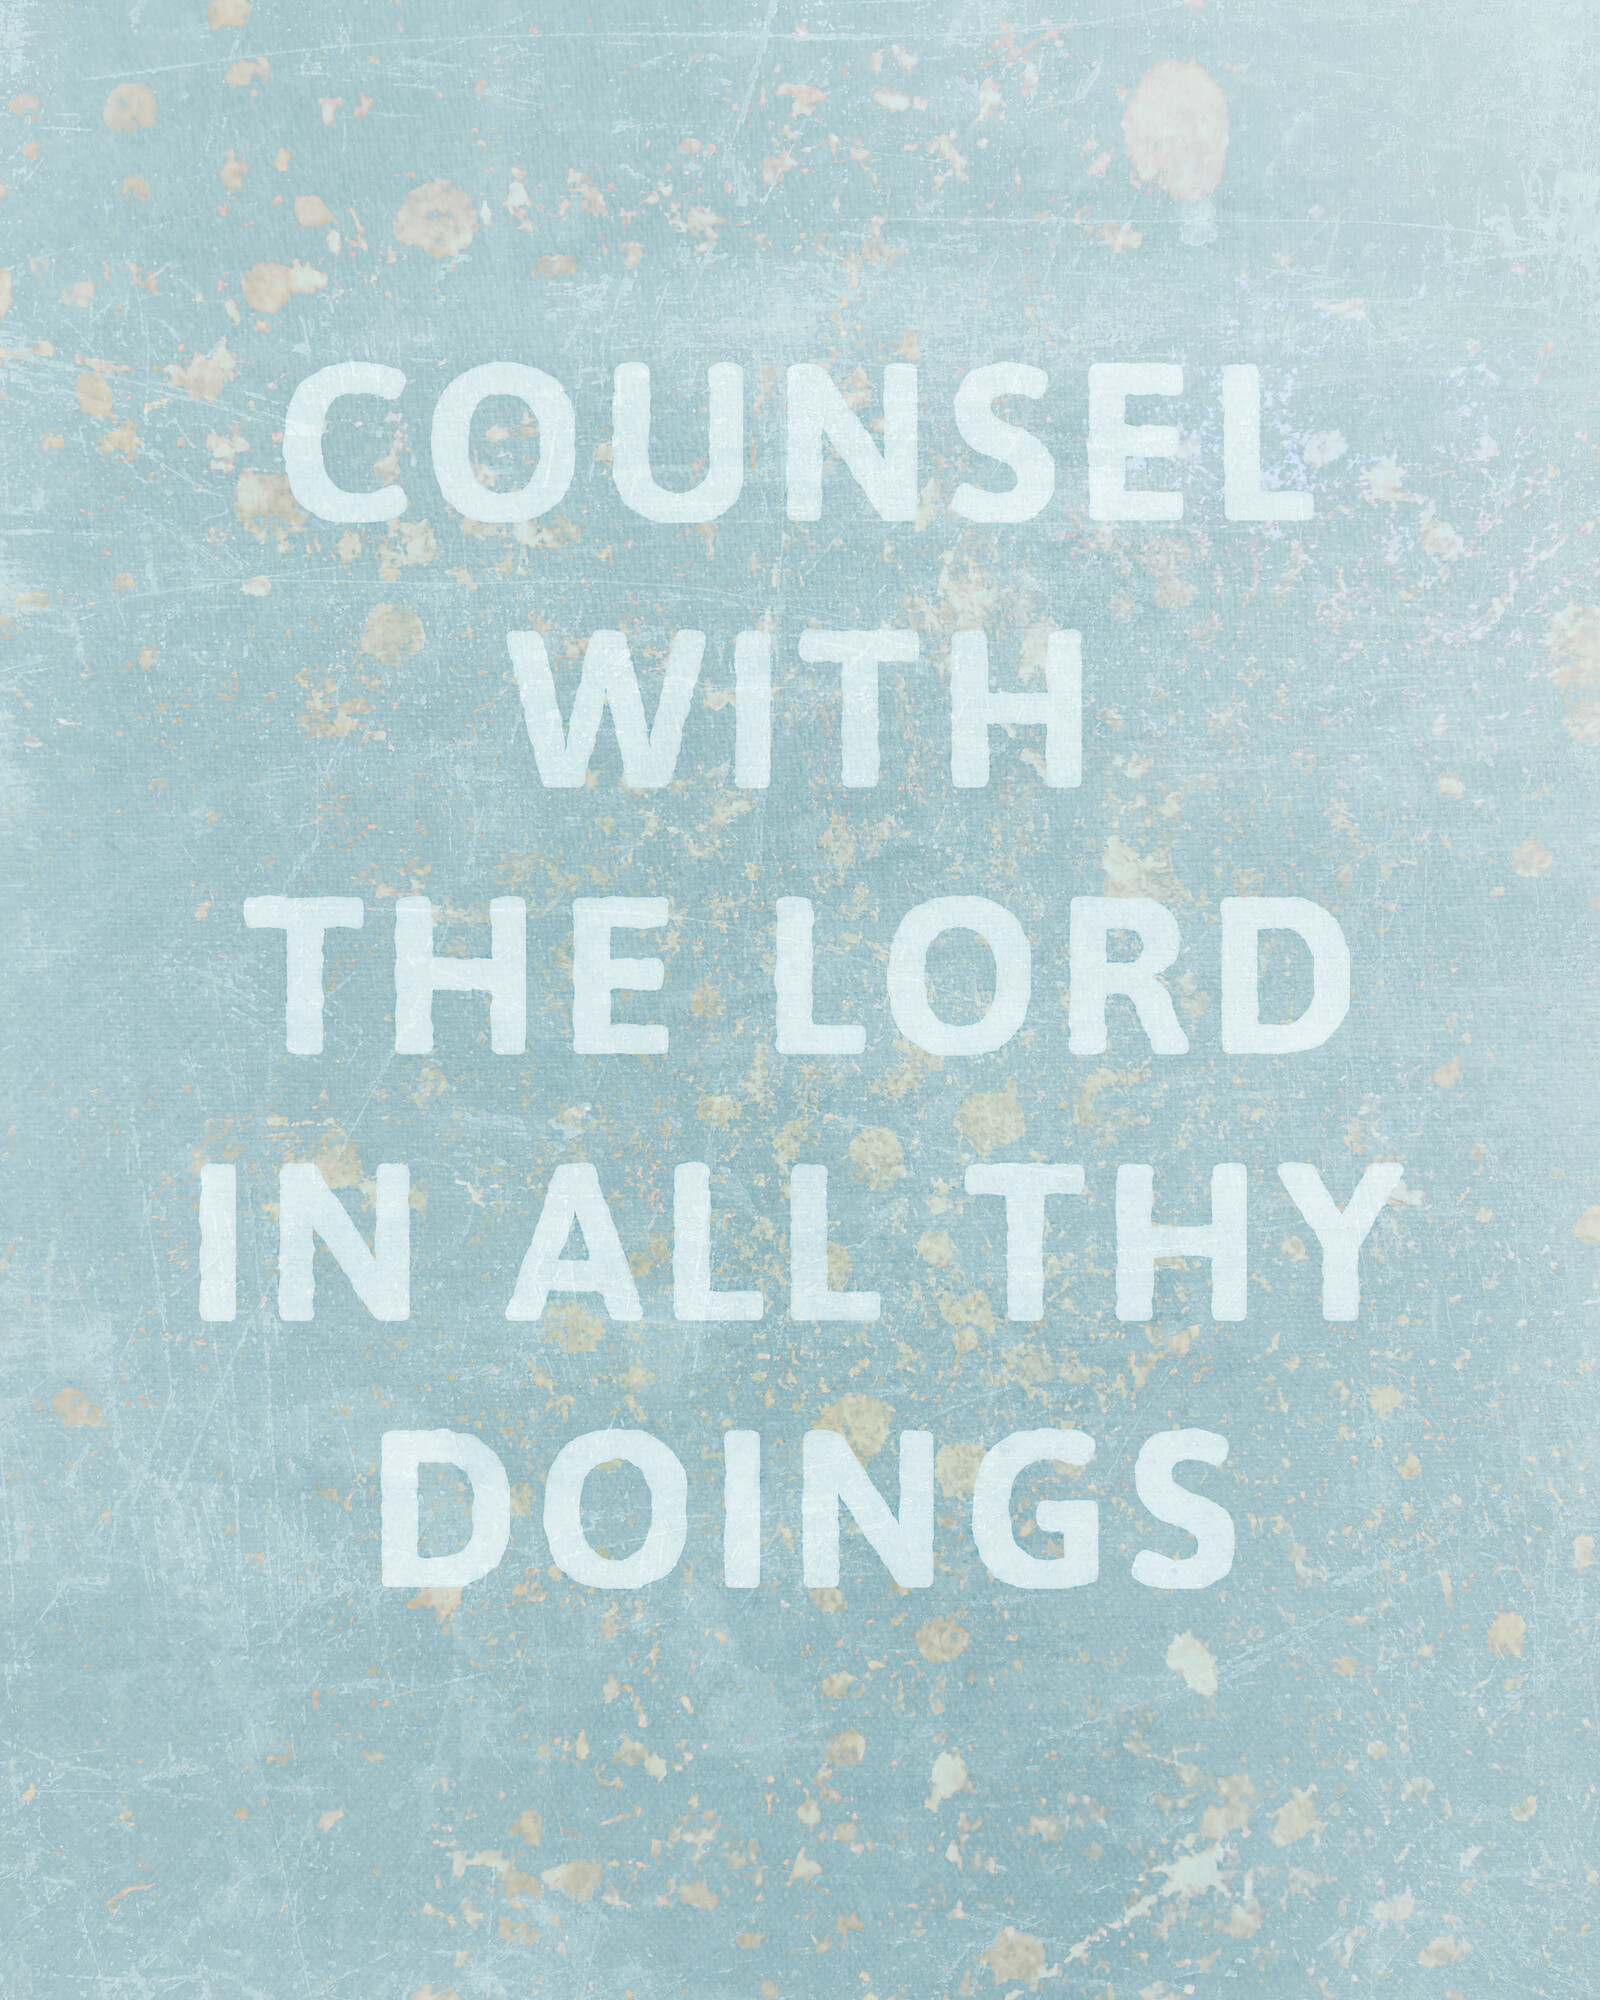 Art with the words "Counsel with the Lord in all thy doings" laid out vertically